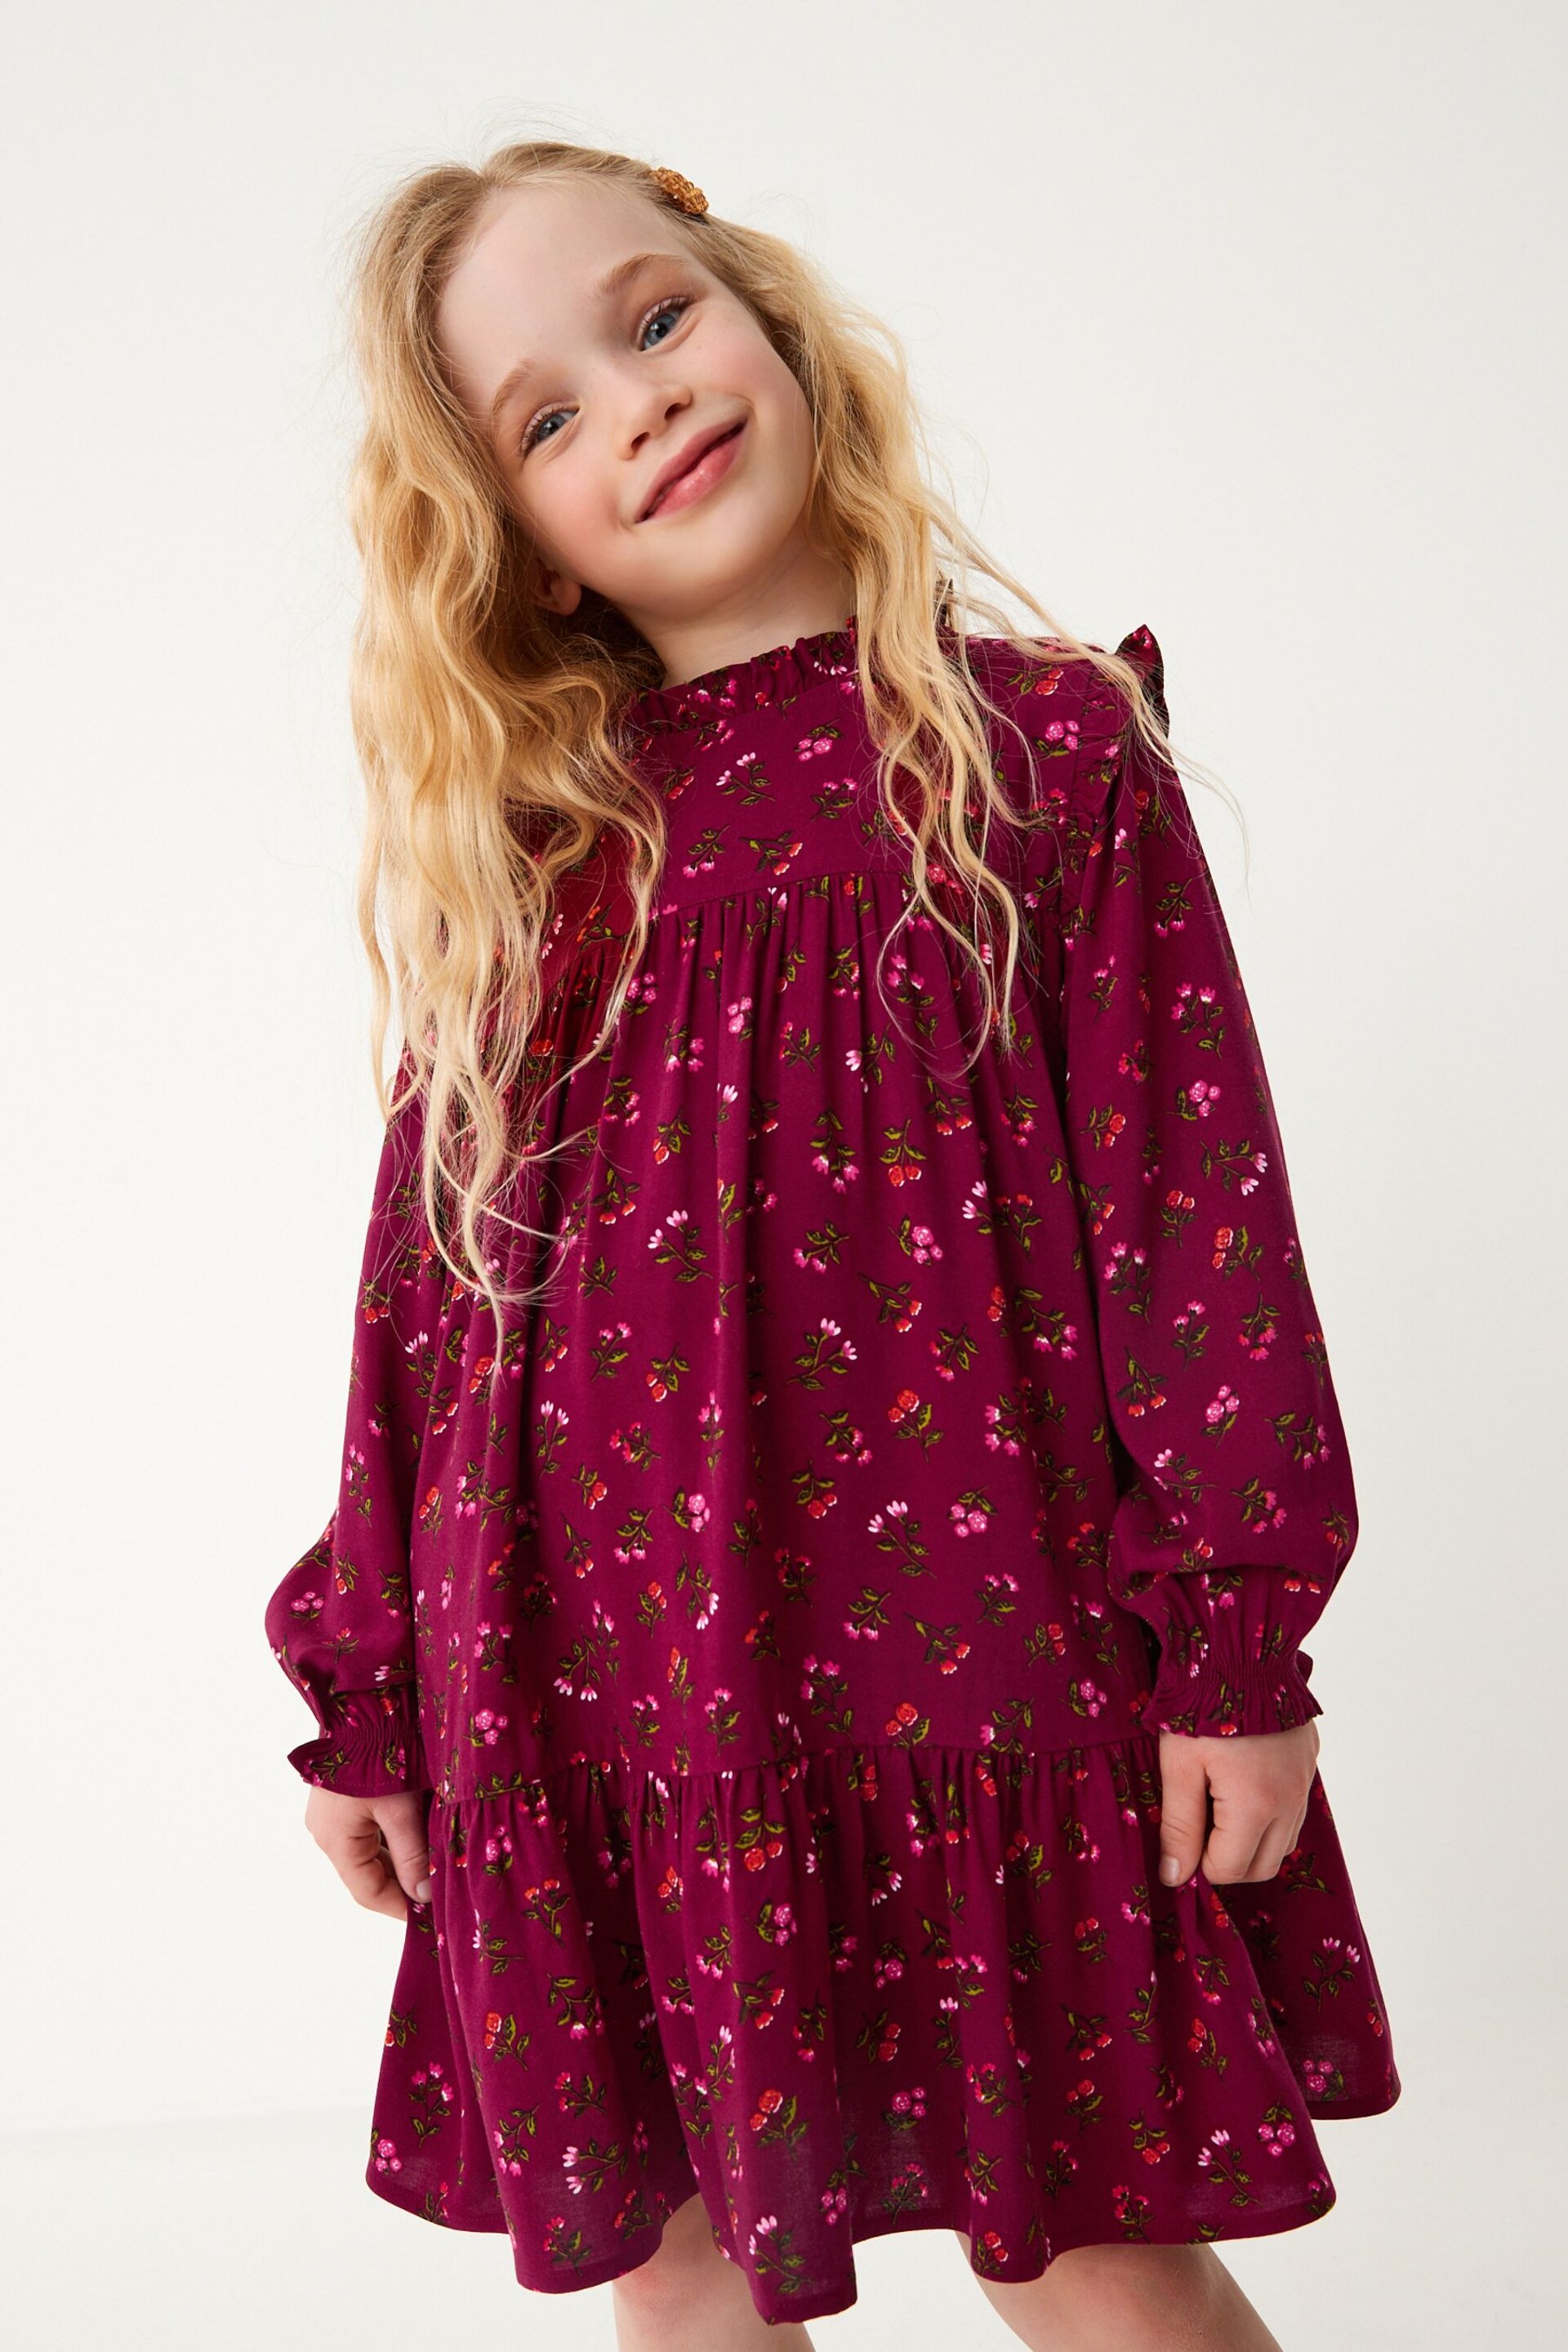 Berry Red Ditsy Print High Neck Long Sleeve Dress (12mths-16yrs) - Image 1 of 5